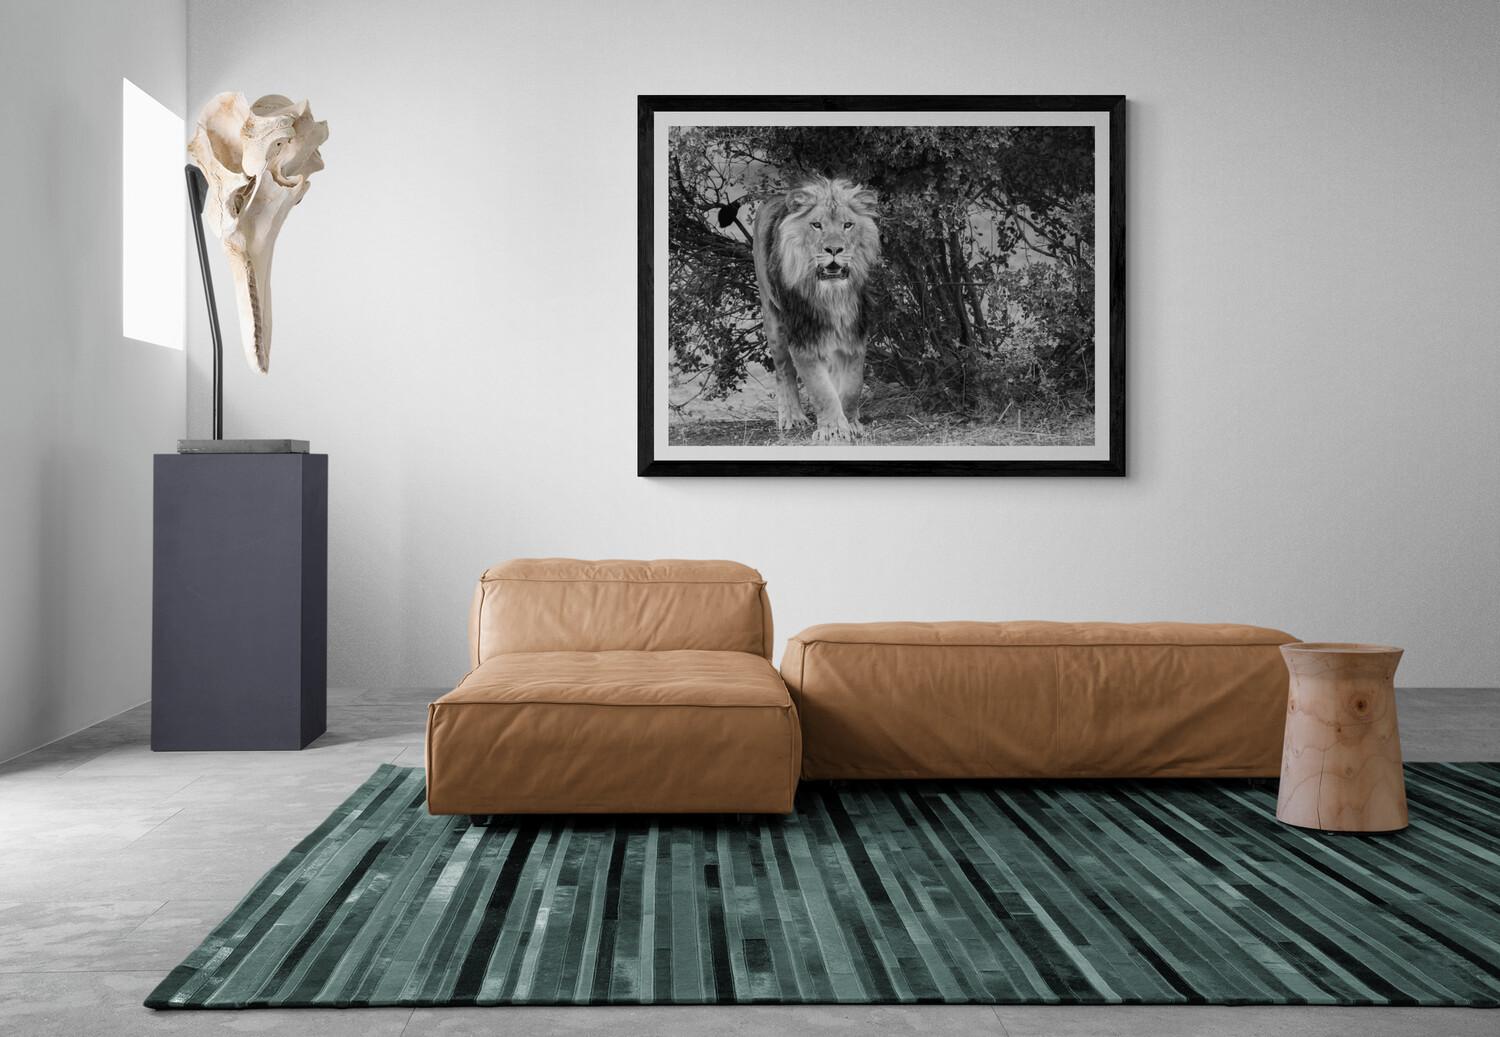 This is a contemporary photograph of an African Lion shot by Shane Russeck
36x48  
Unsigned
Printed on archival luster paper.  

Shane Russeck has built a reputation for capturing America's landscapes, cultures and endangered animals. Born in